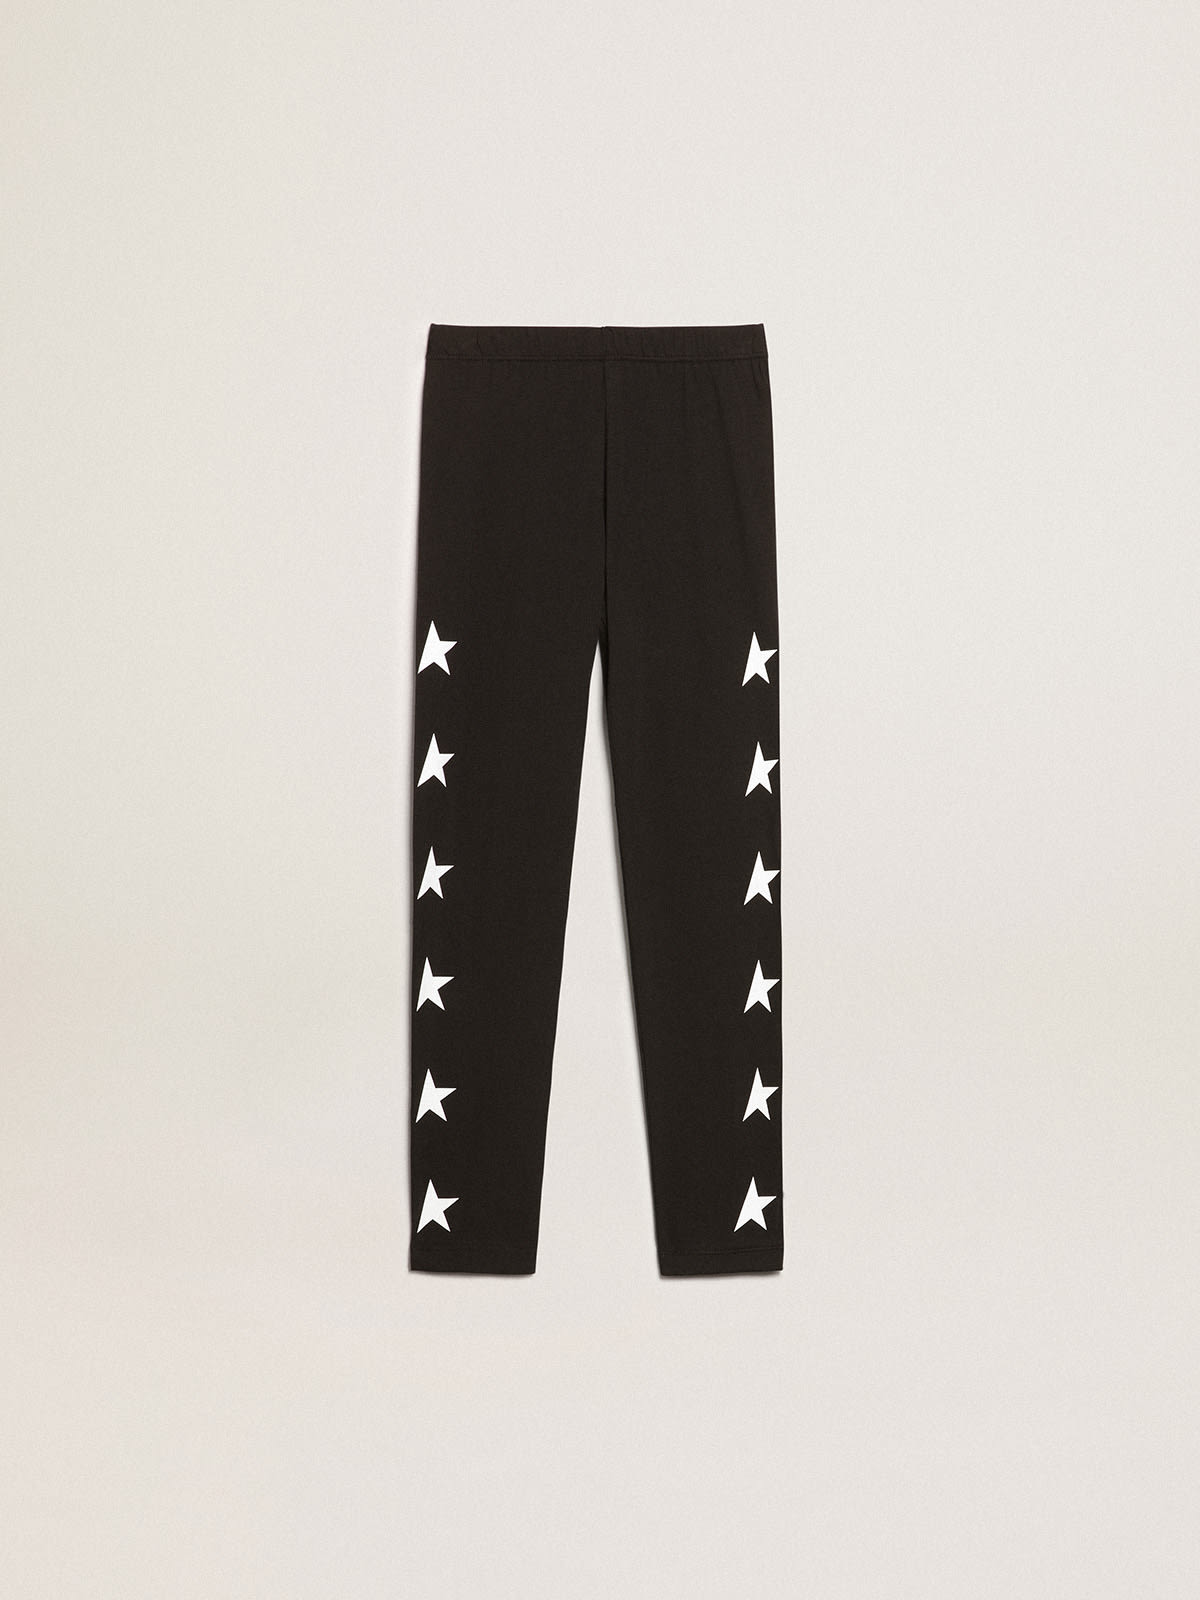 Golden Goose - Black Star Collection leggings with contrasting white stars in 